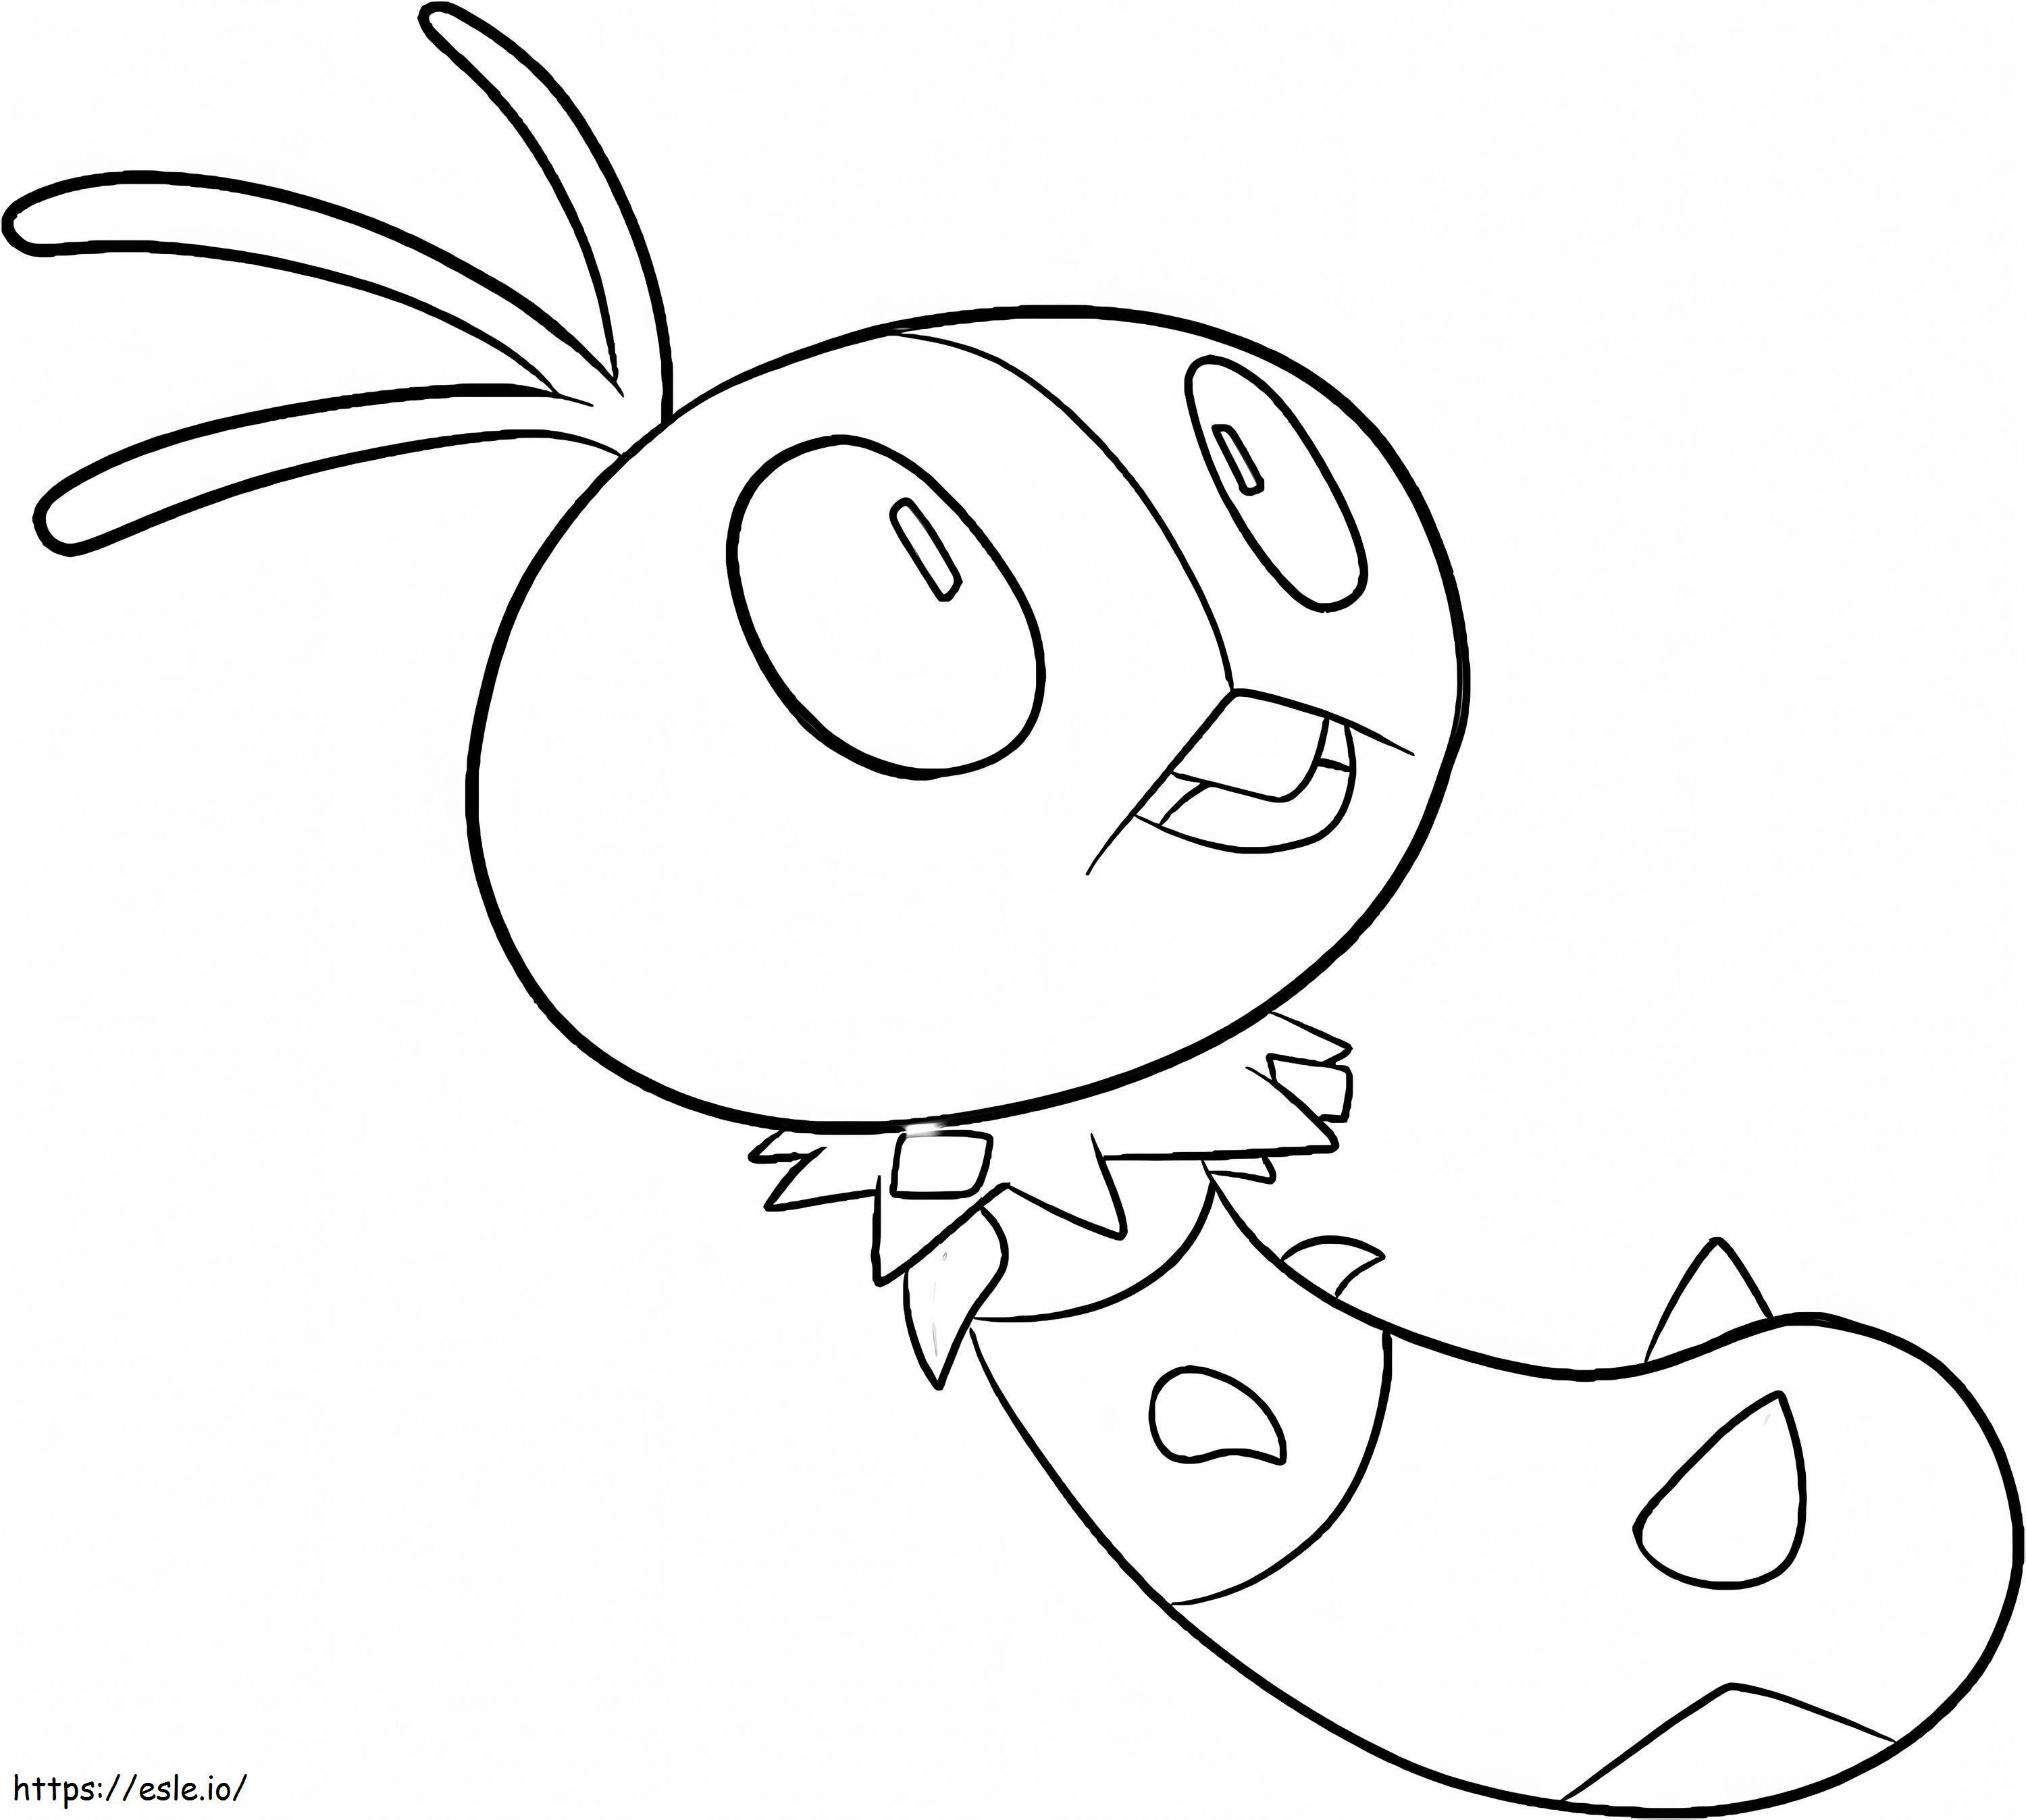 Scatterbug Pokemon 1 coloring page